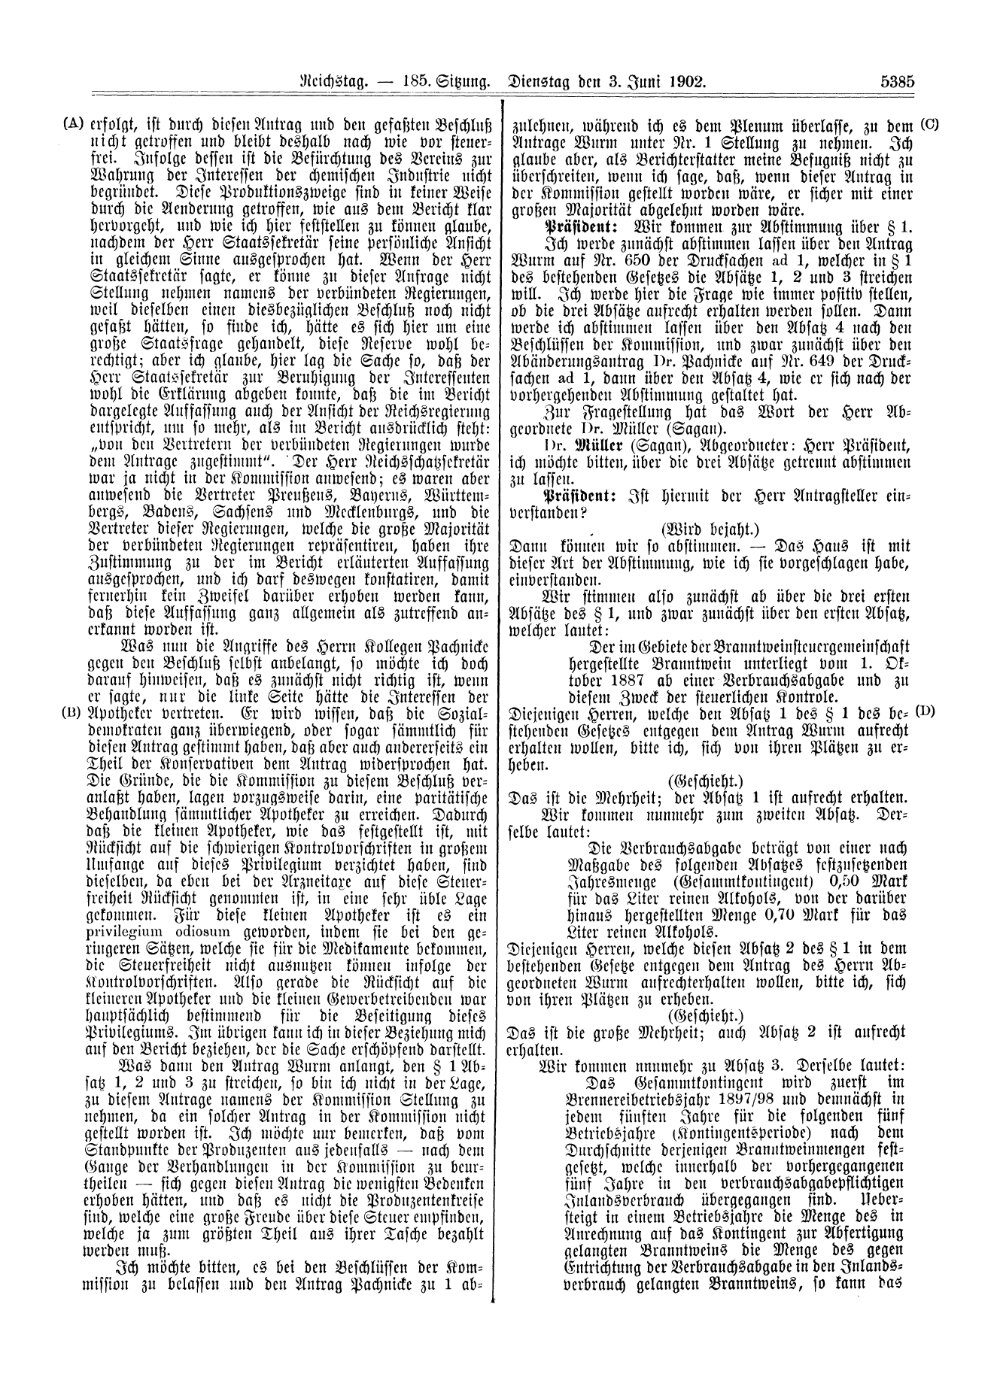 Scan of page 5385